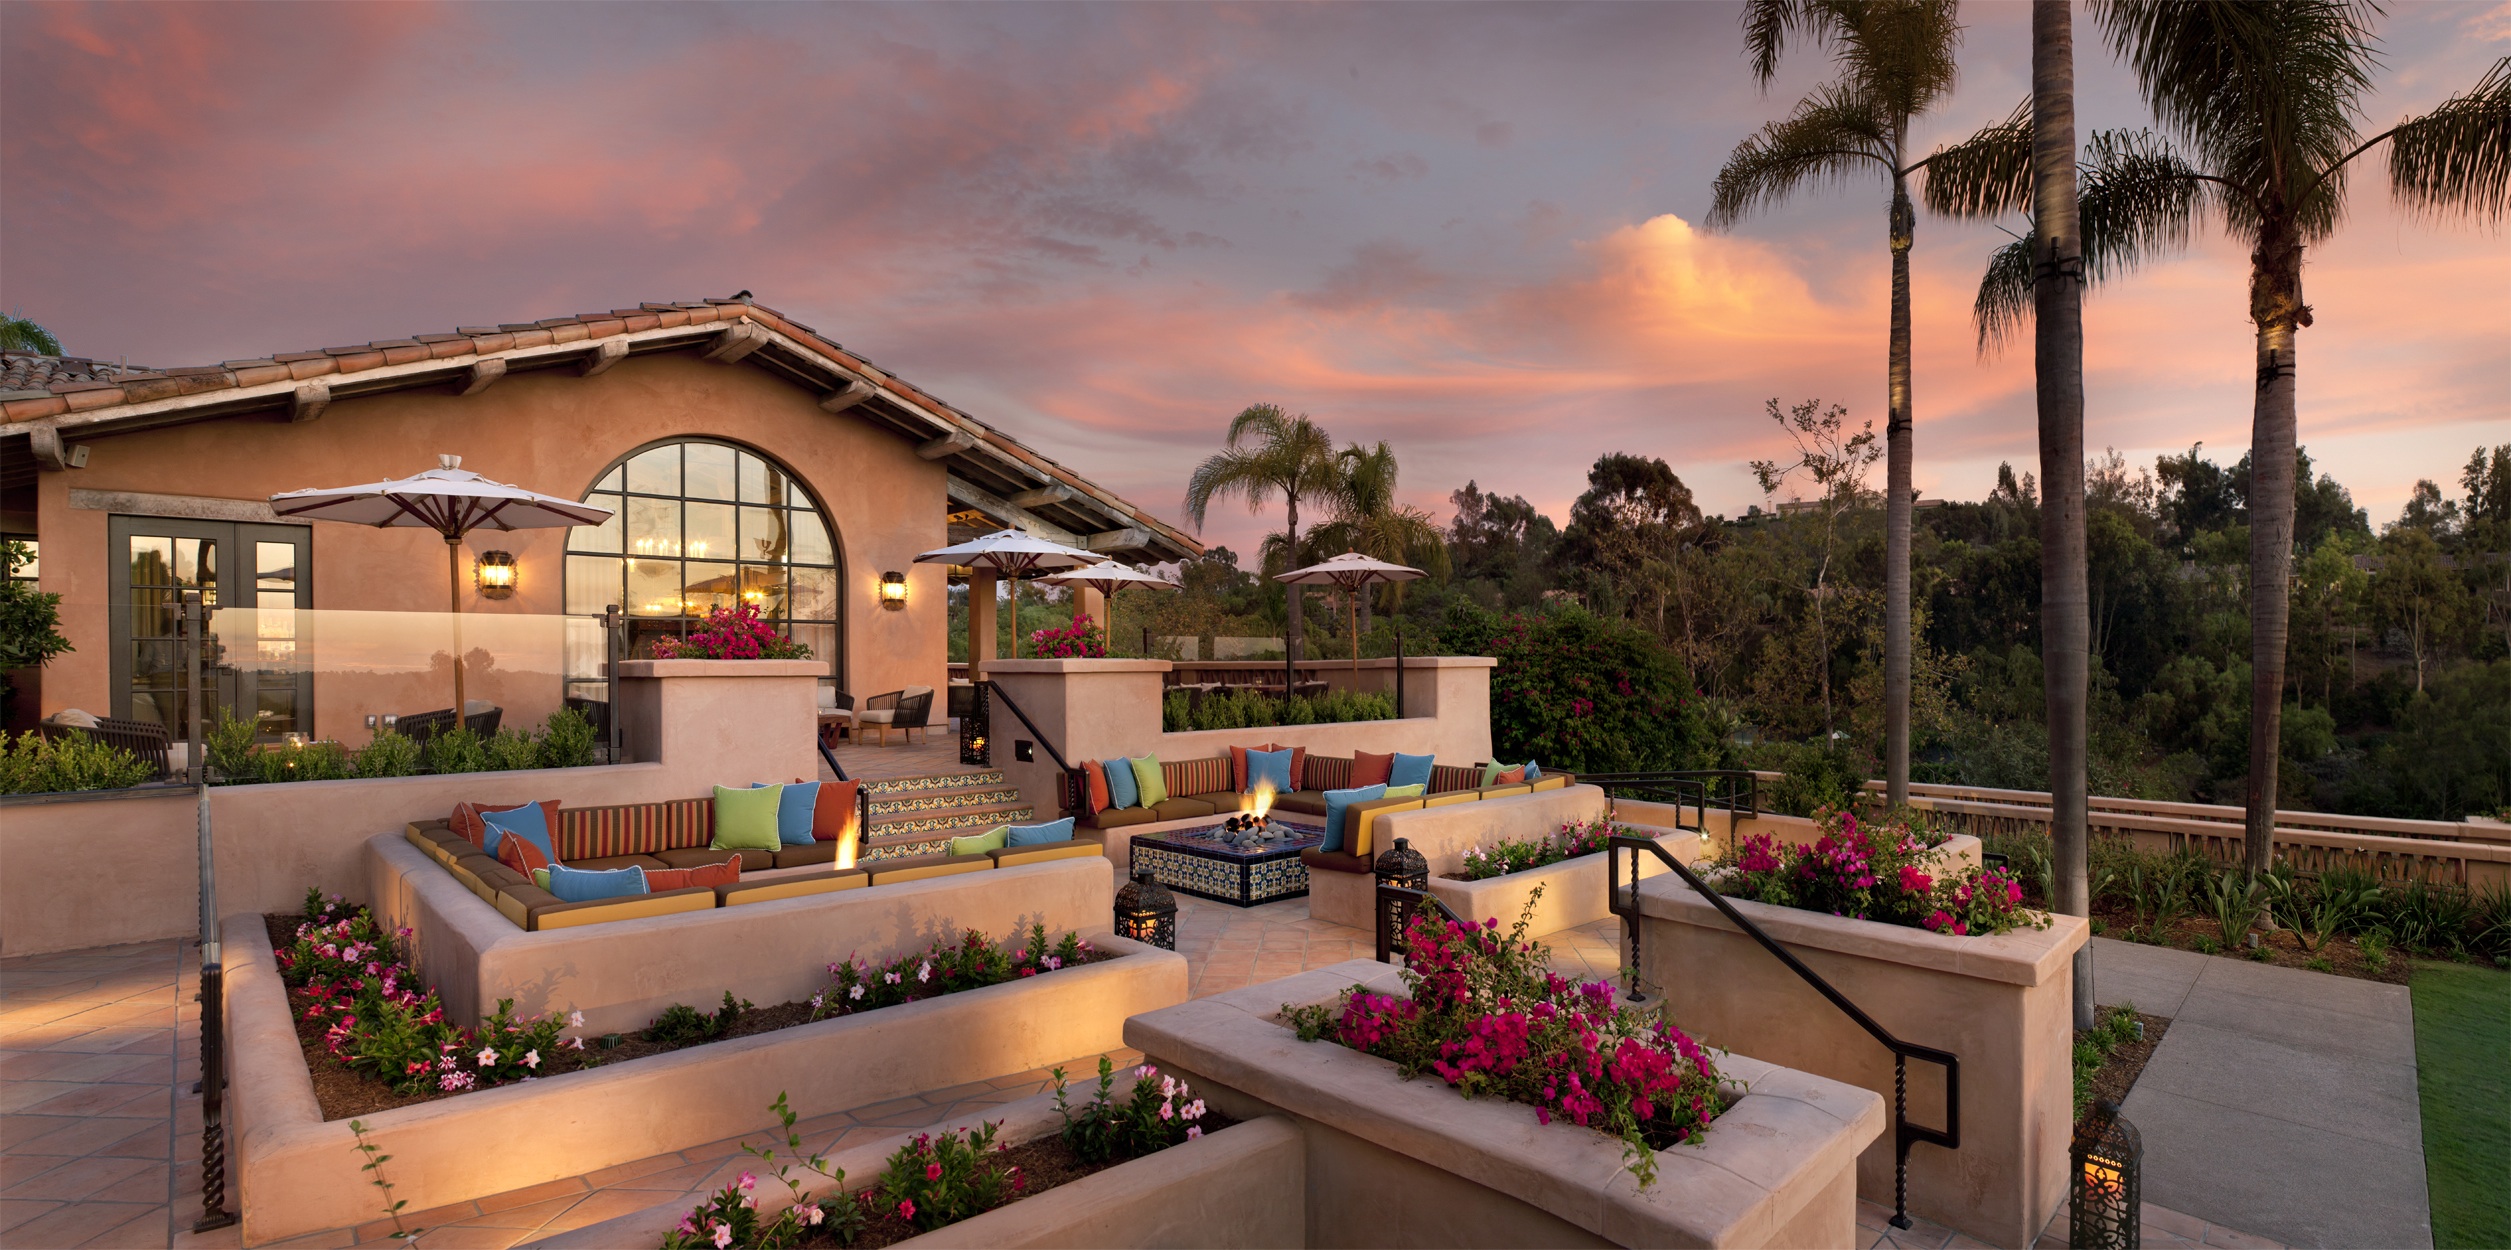 Relax at Rancho Valencia Resort and Spa in San Diego.